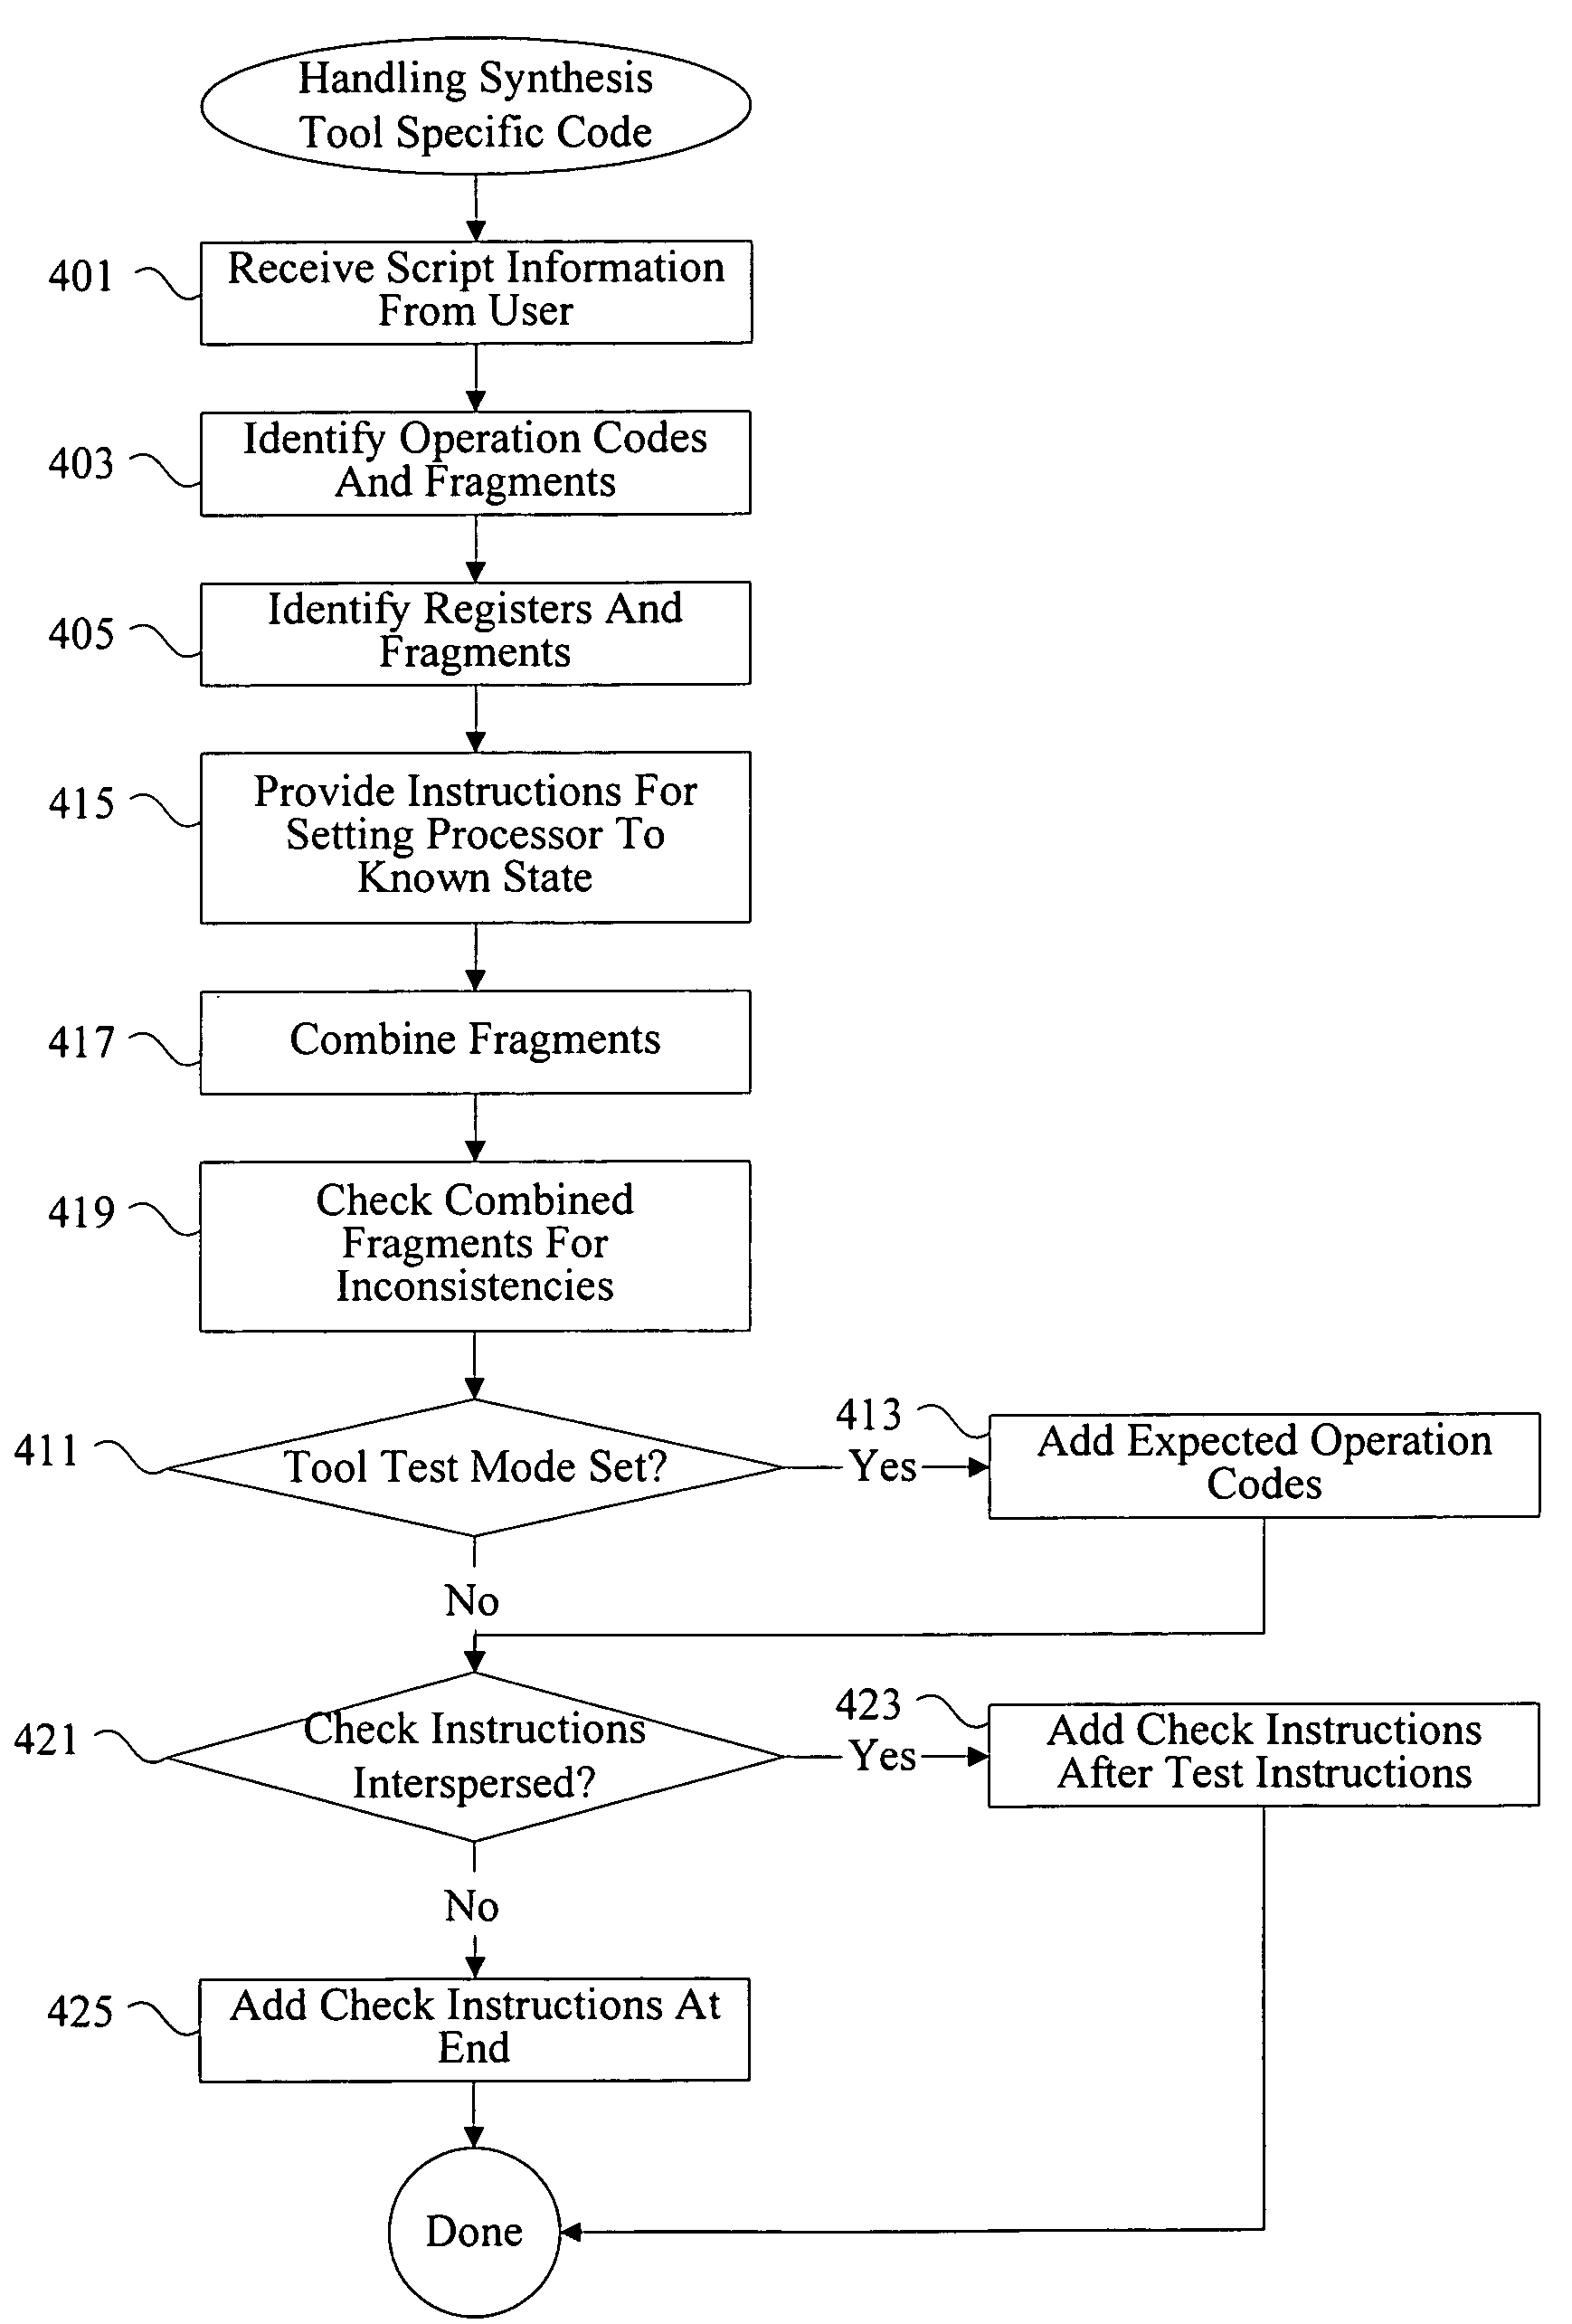 Methods and apparatus for generating test instruction sequences